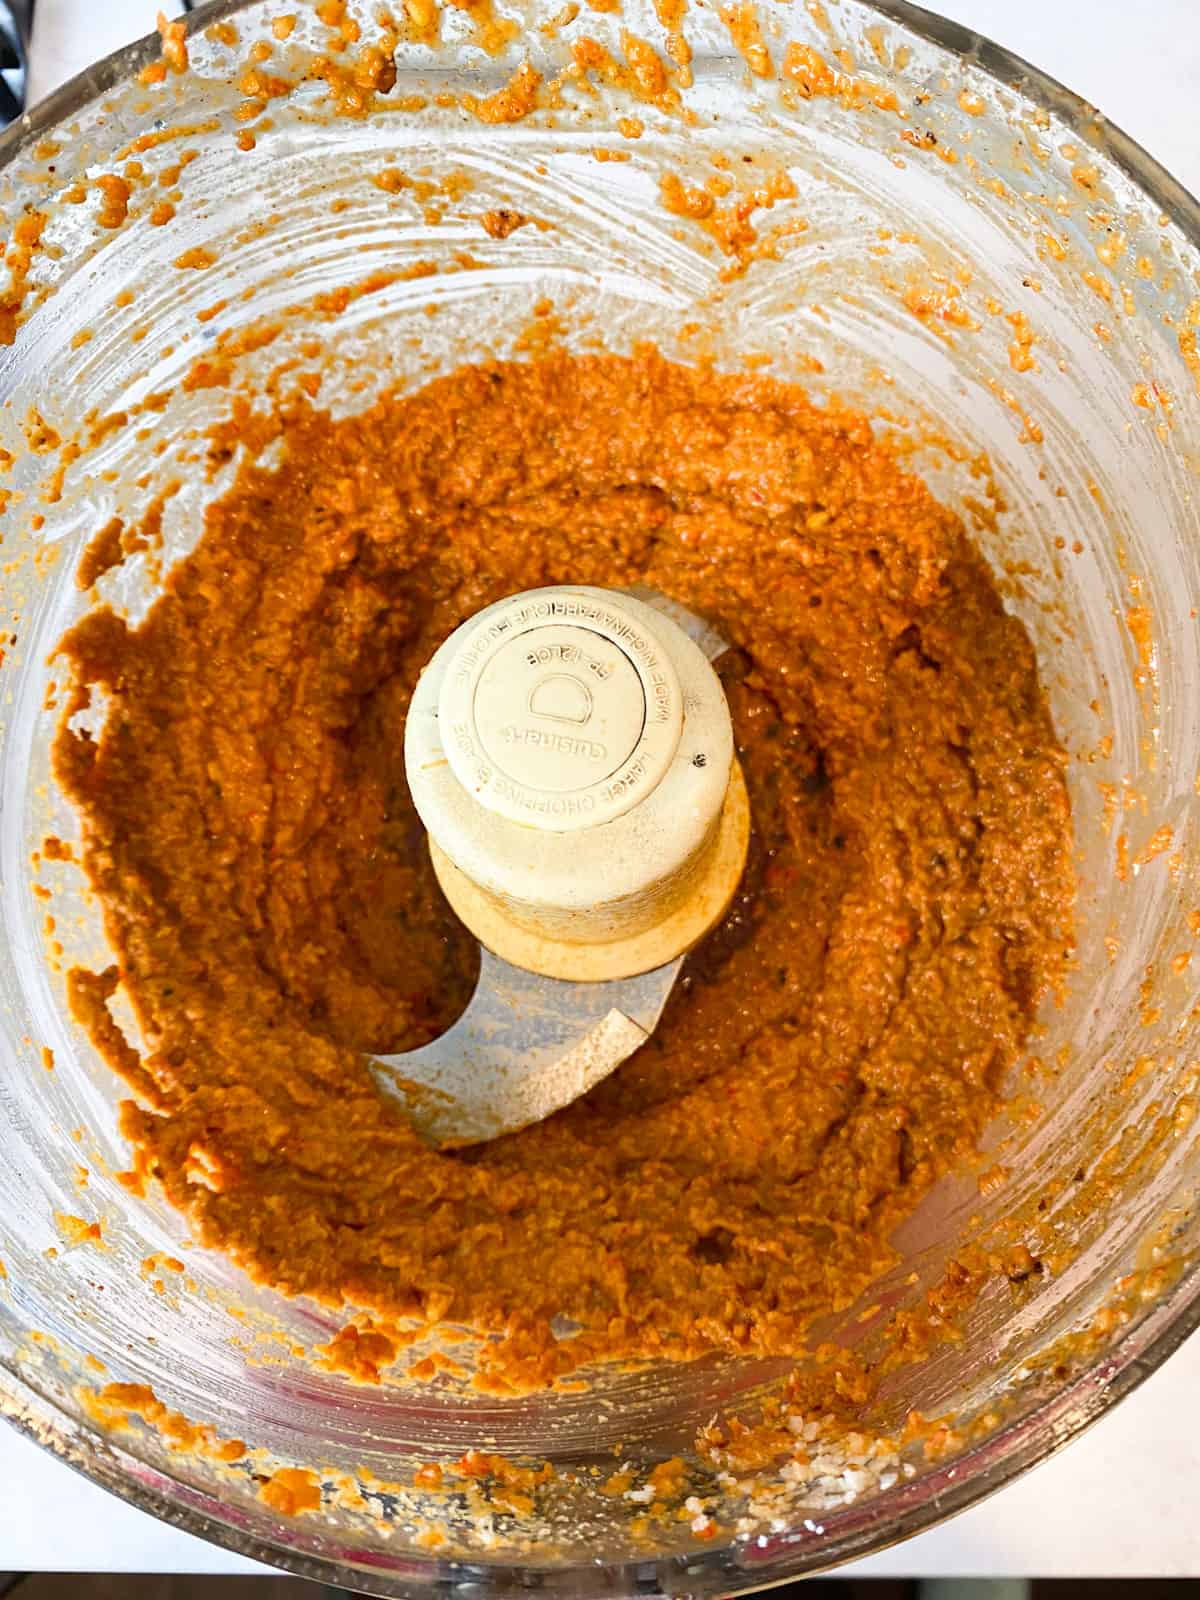 Blend the muhammara in a food processor until there are no large pieces left and the mixture is smooth.